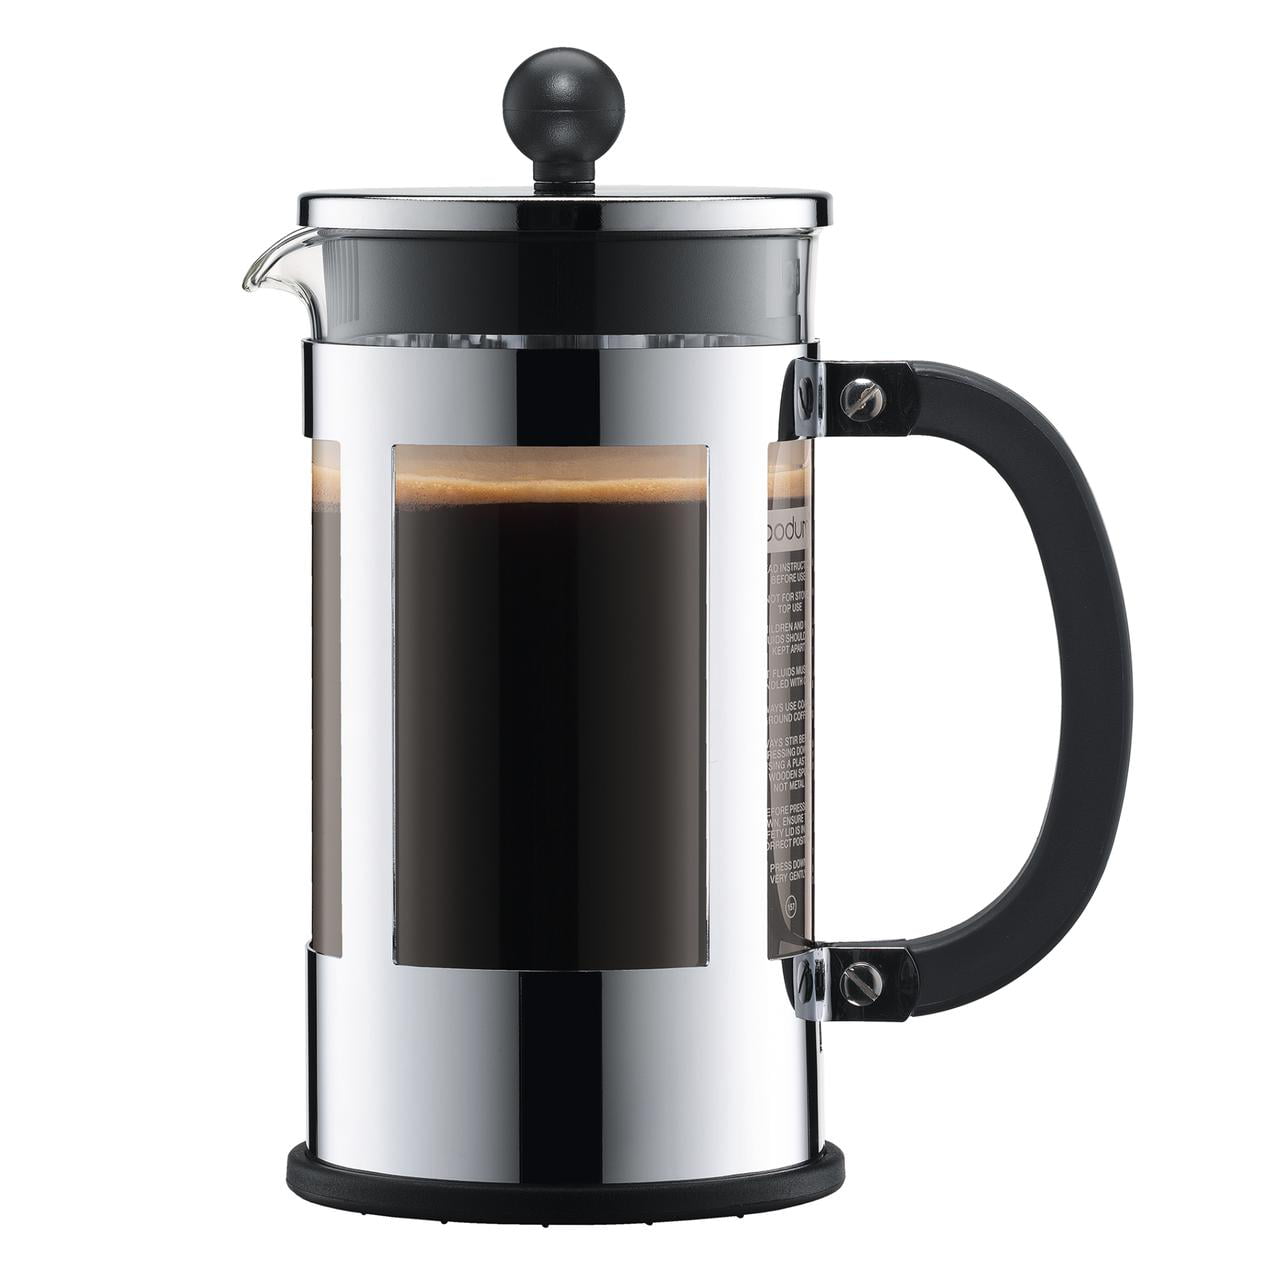 Bodum French Press Coffee Maker #157 Stainless Steel / Black 4 Cup 32 oz